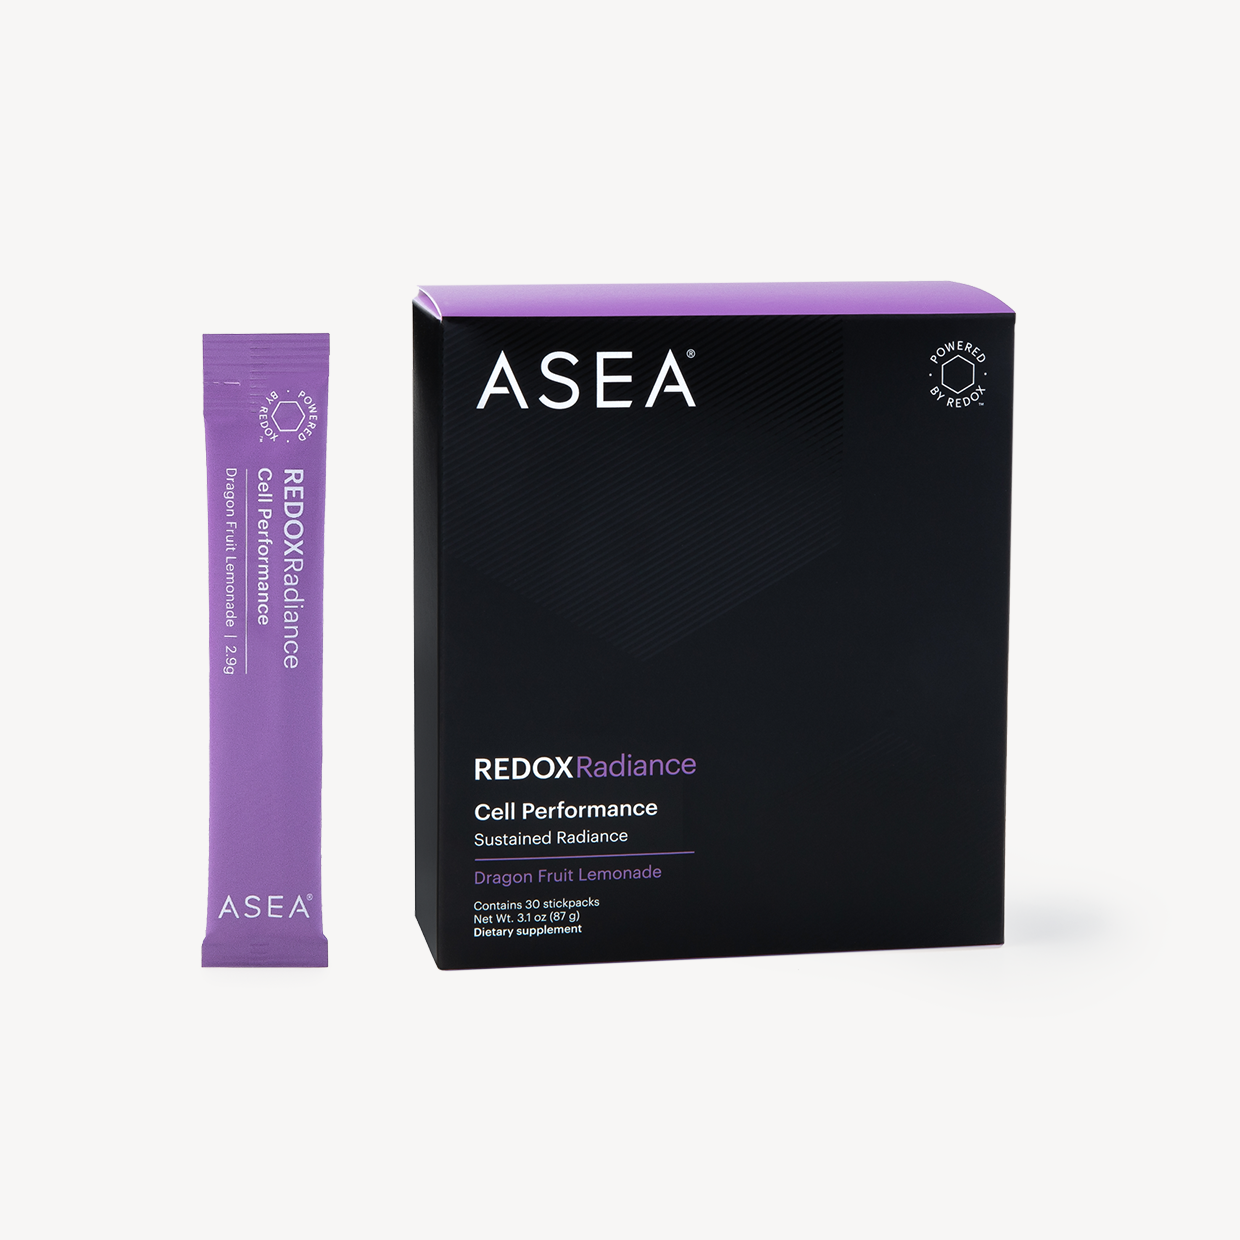 ASEA REDOXRadiance Cell Performance